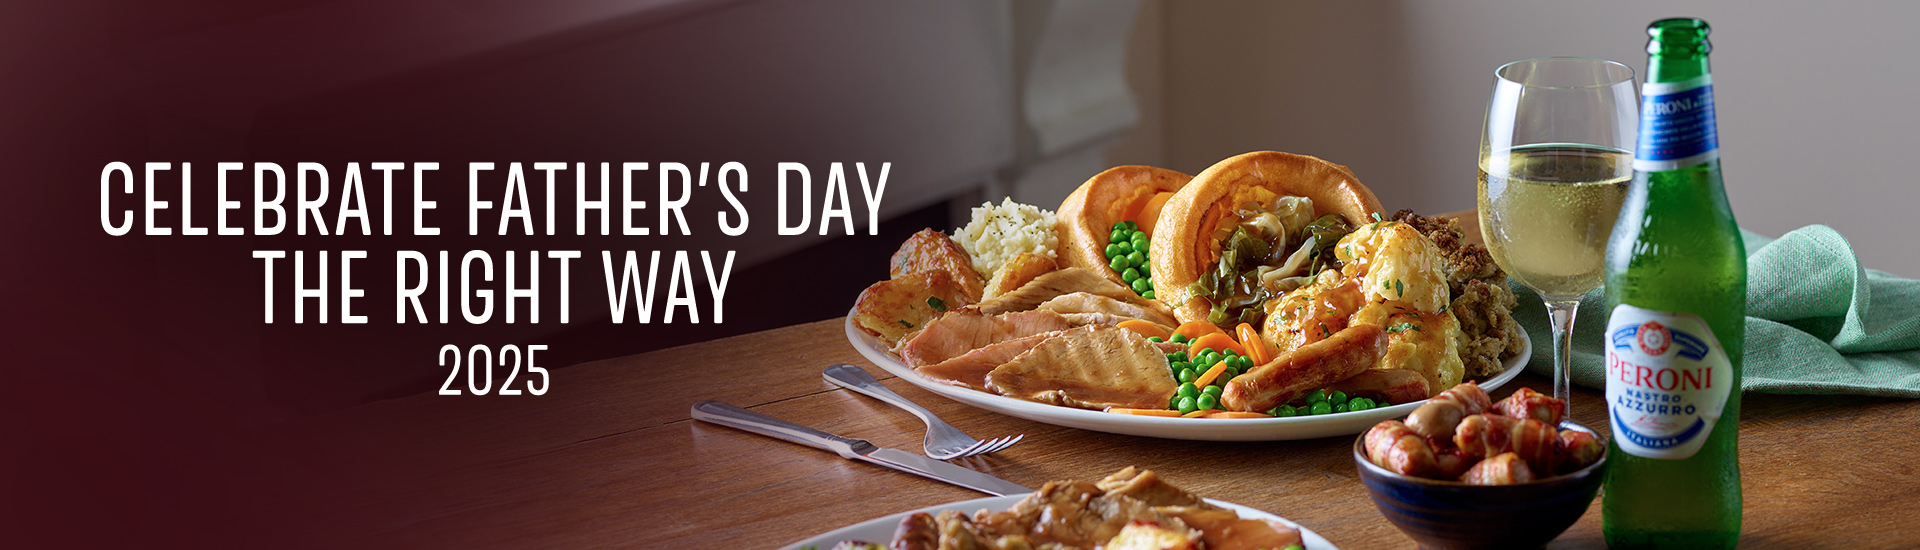 Father’s day carvery in Doncaster